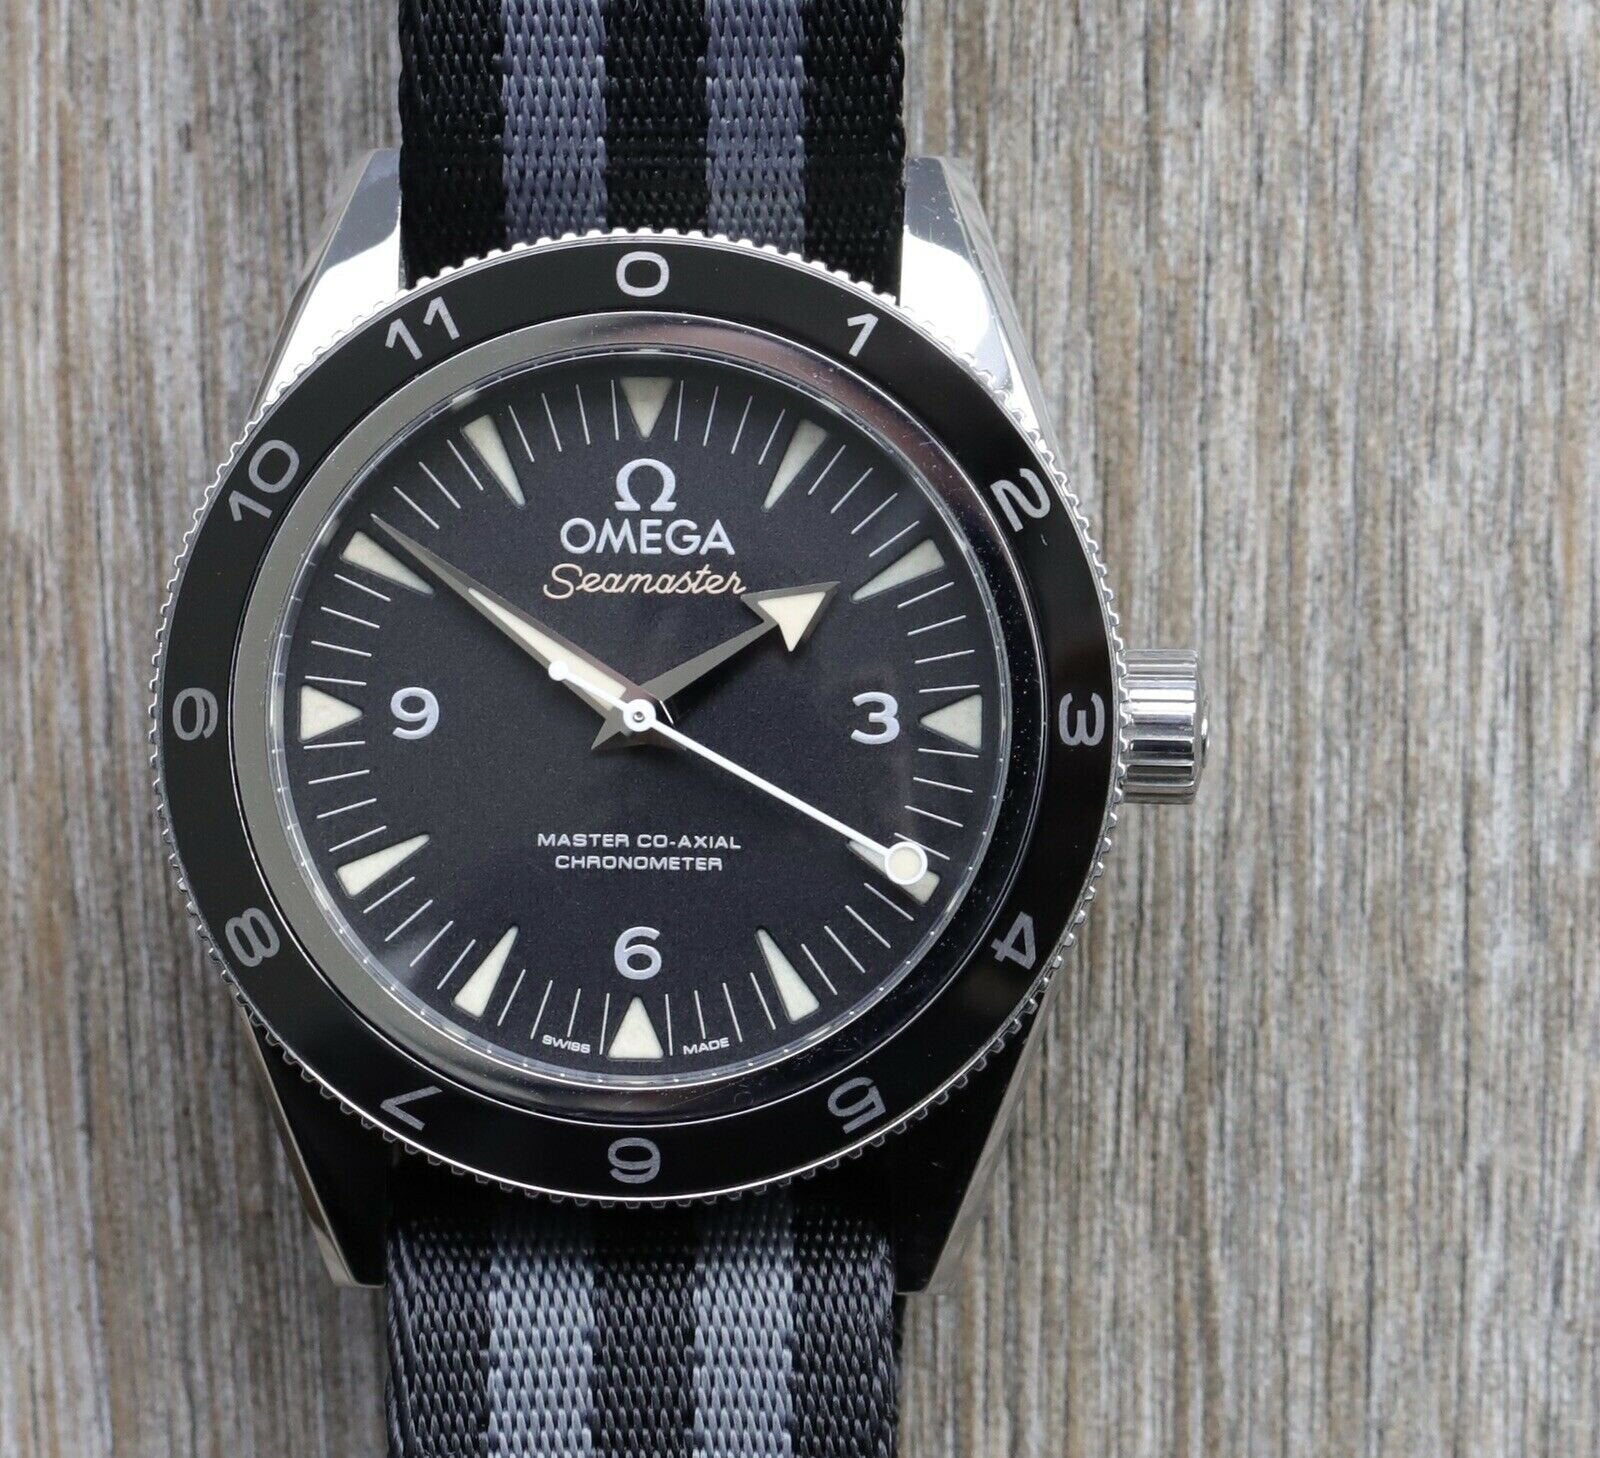 Omega_Seamaster_300_SPECTRE_LE_Co-Axial_41mm_233.32.41.21.01.001_-_2015_Watch_Vault_01.jpg